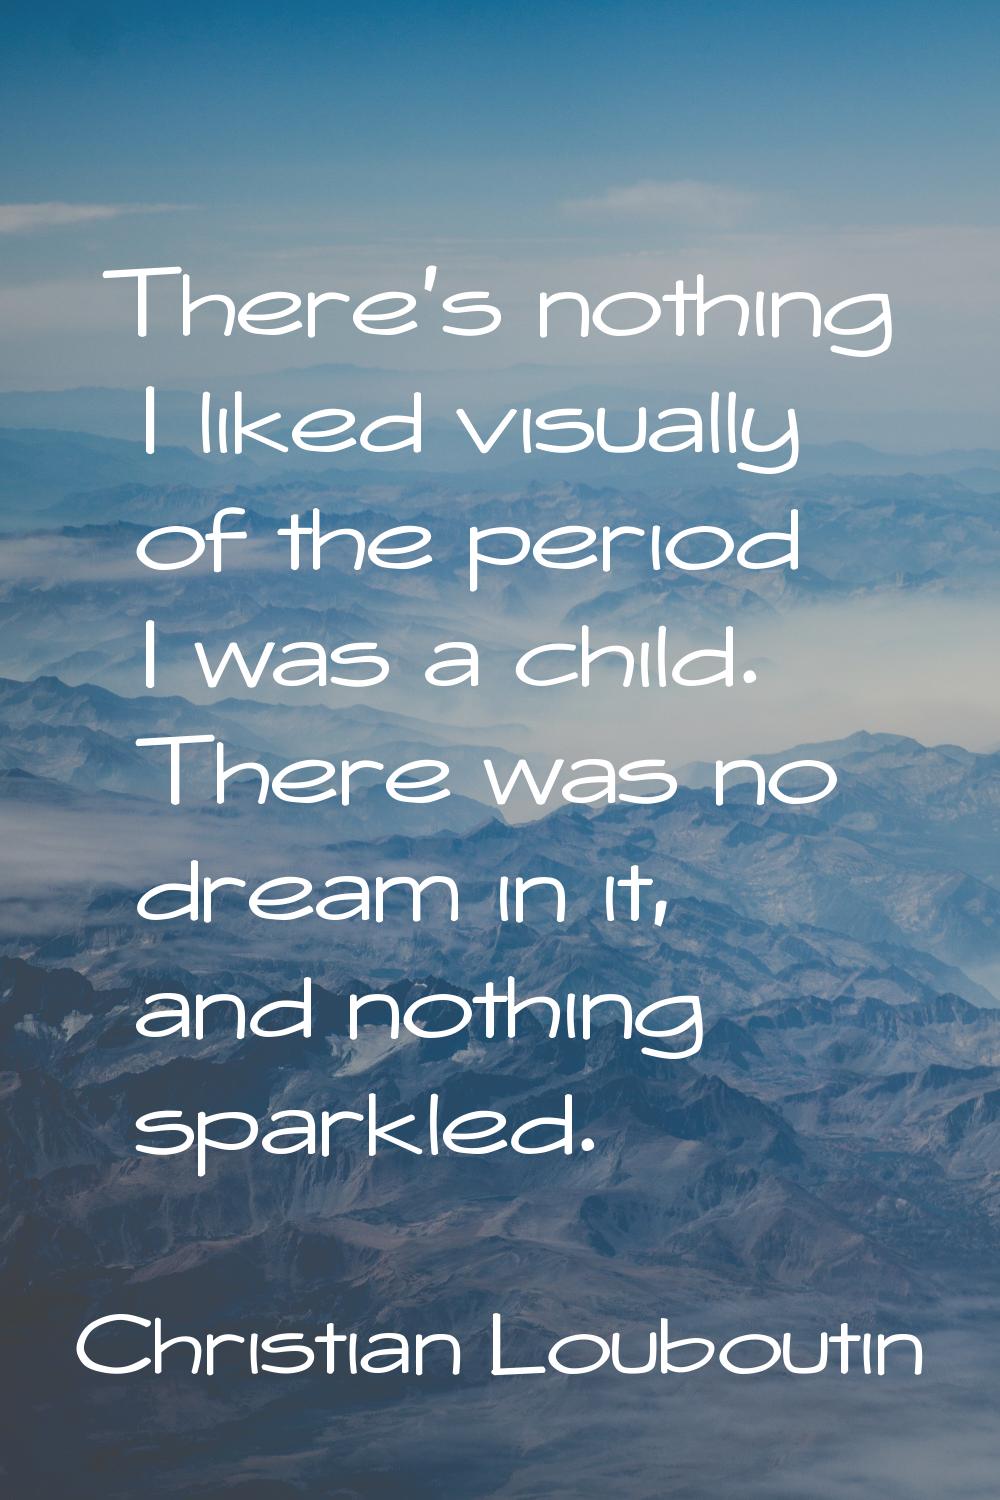 There's nothing I liked visually of the period I was a child. There was no dream in it, and nothing